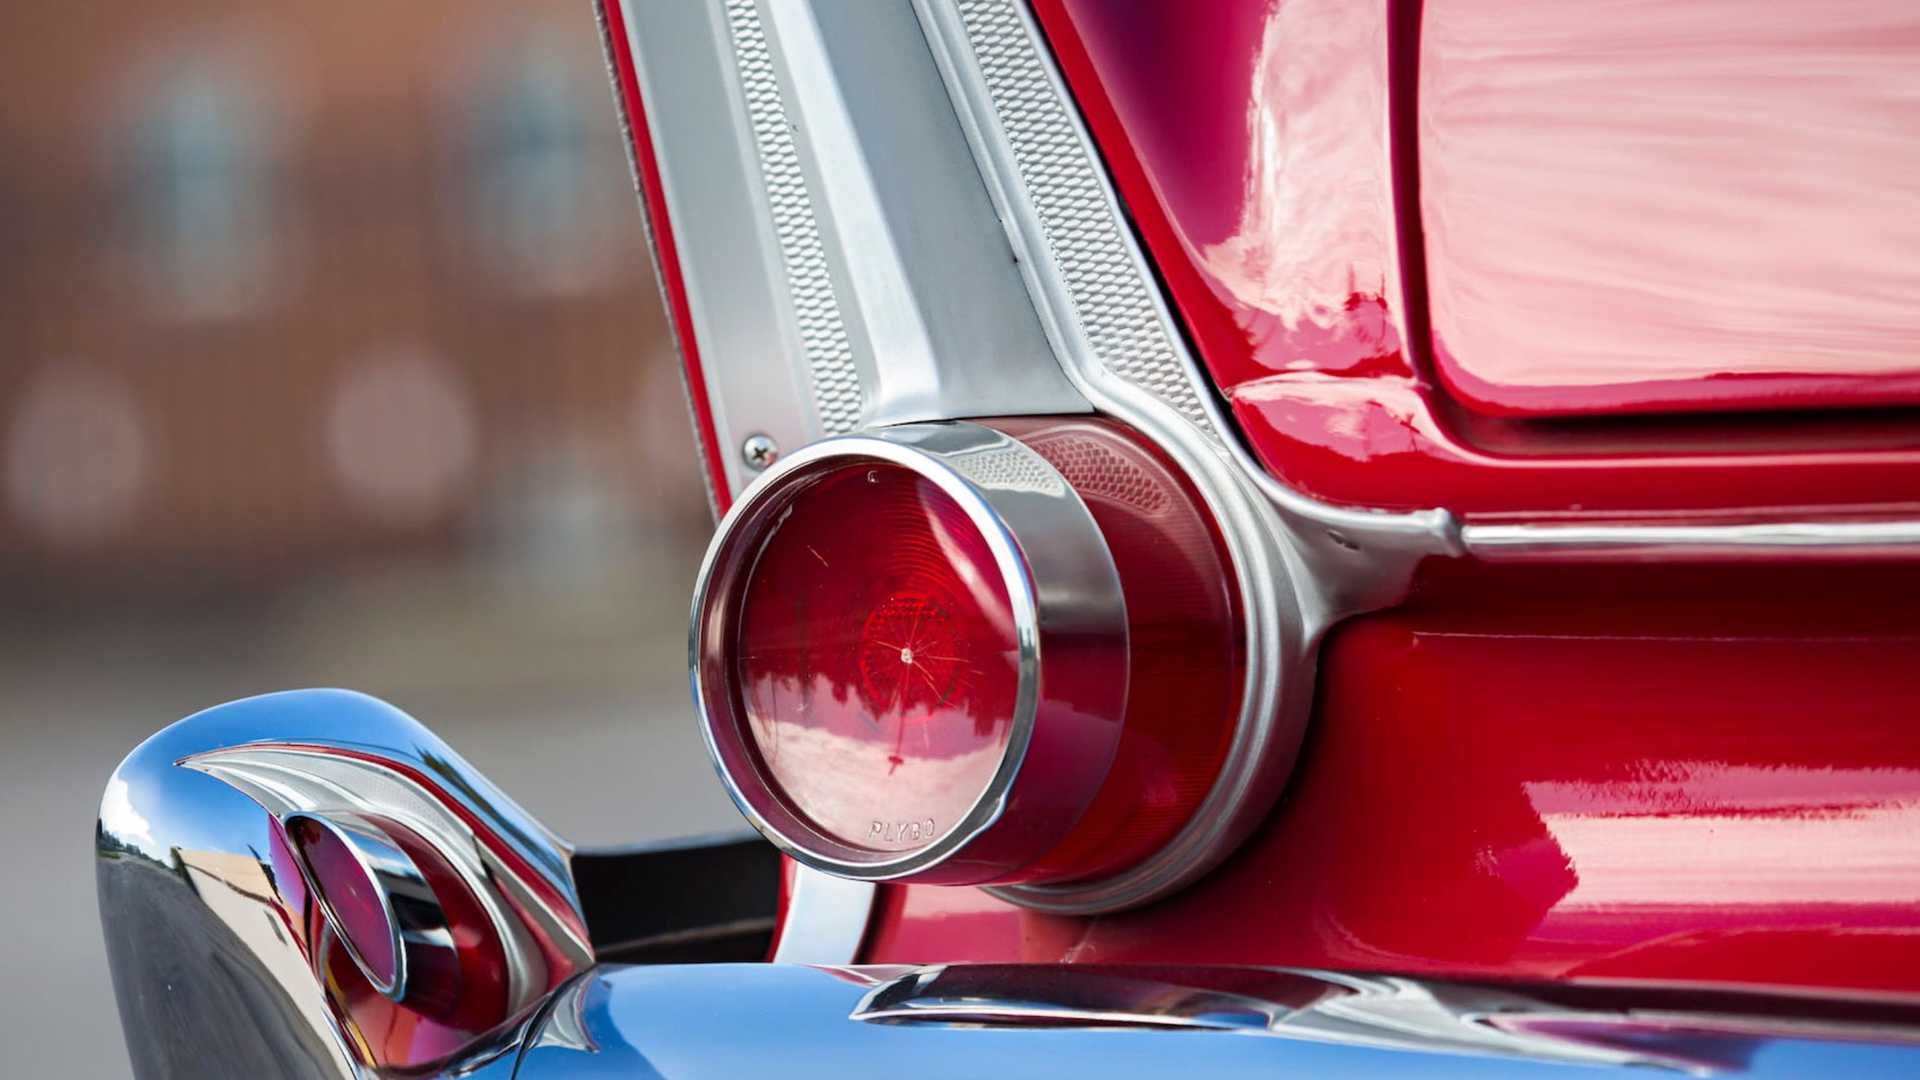 1958 Plymouth Fury taillight close-up view